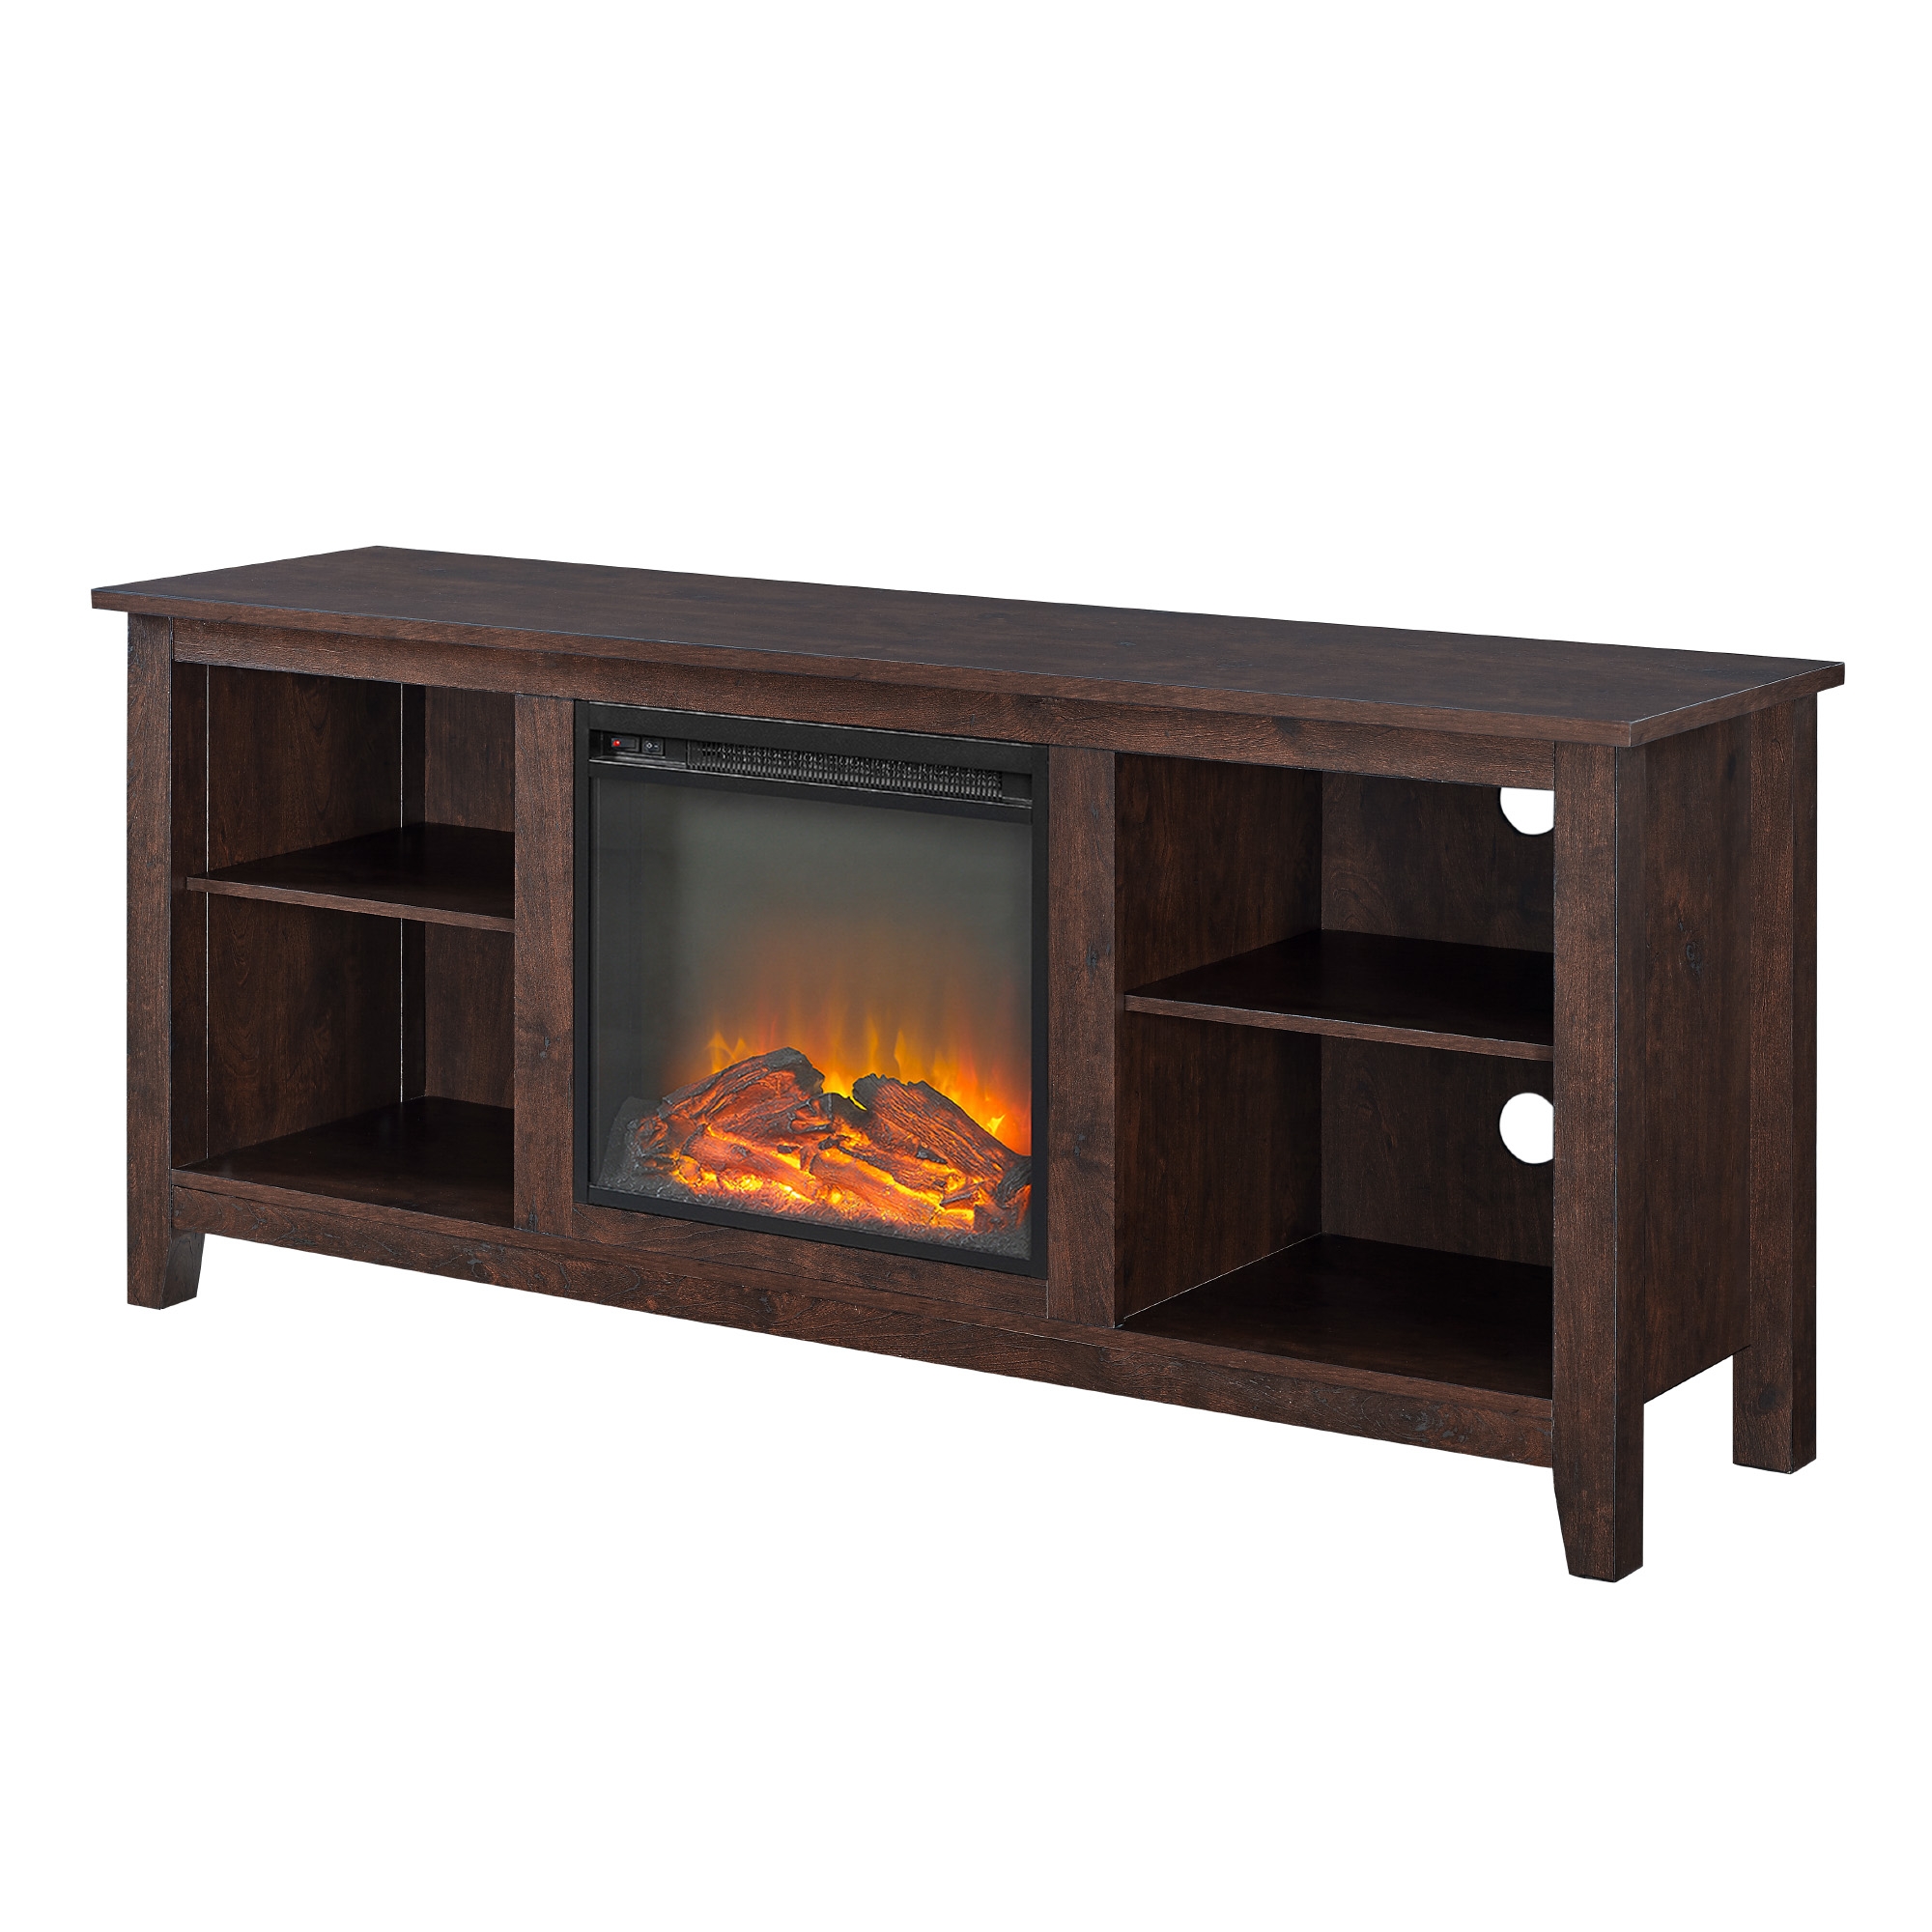 Essential 58" Traditional Rustic Farmhouse Electric Fireplace TV Stand - Brown - Image 2